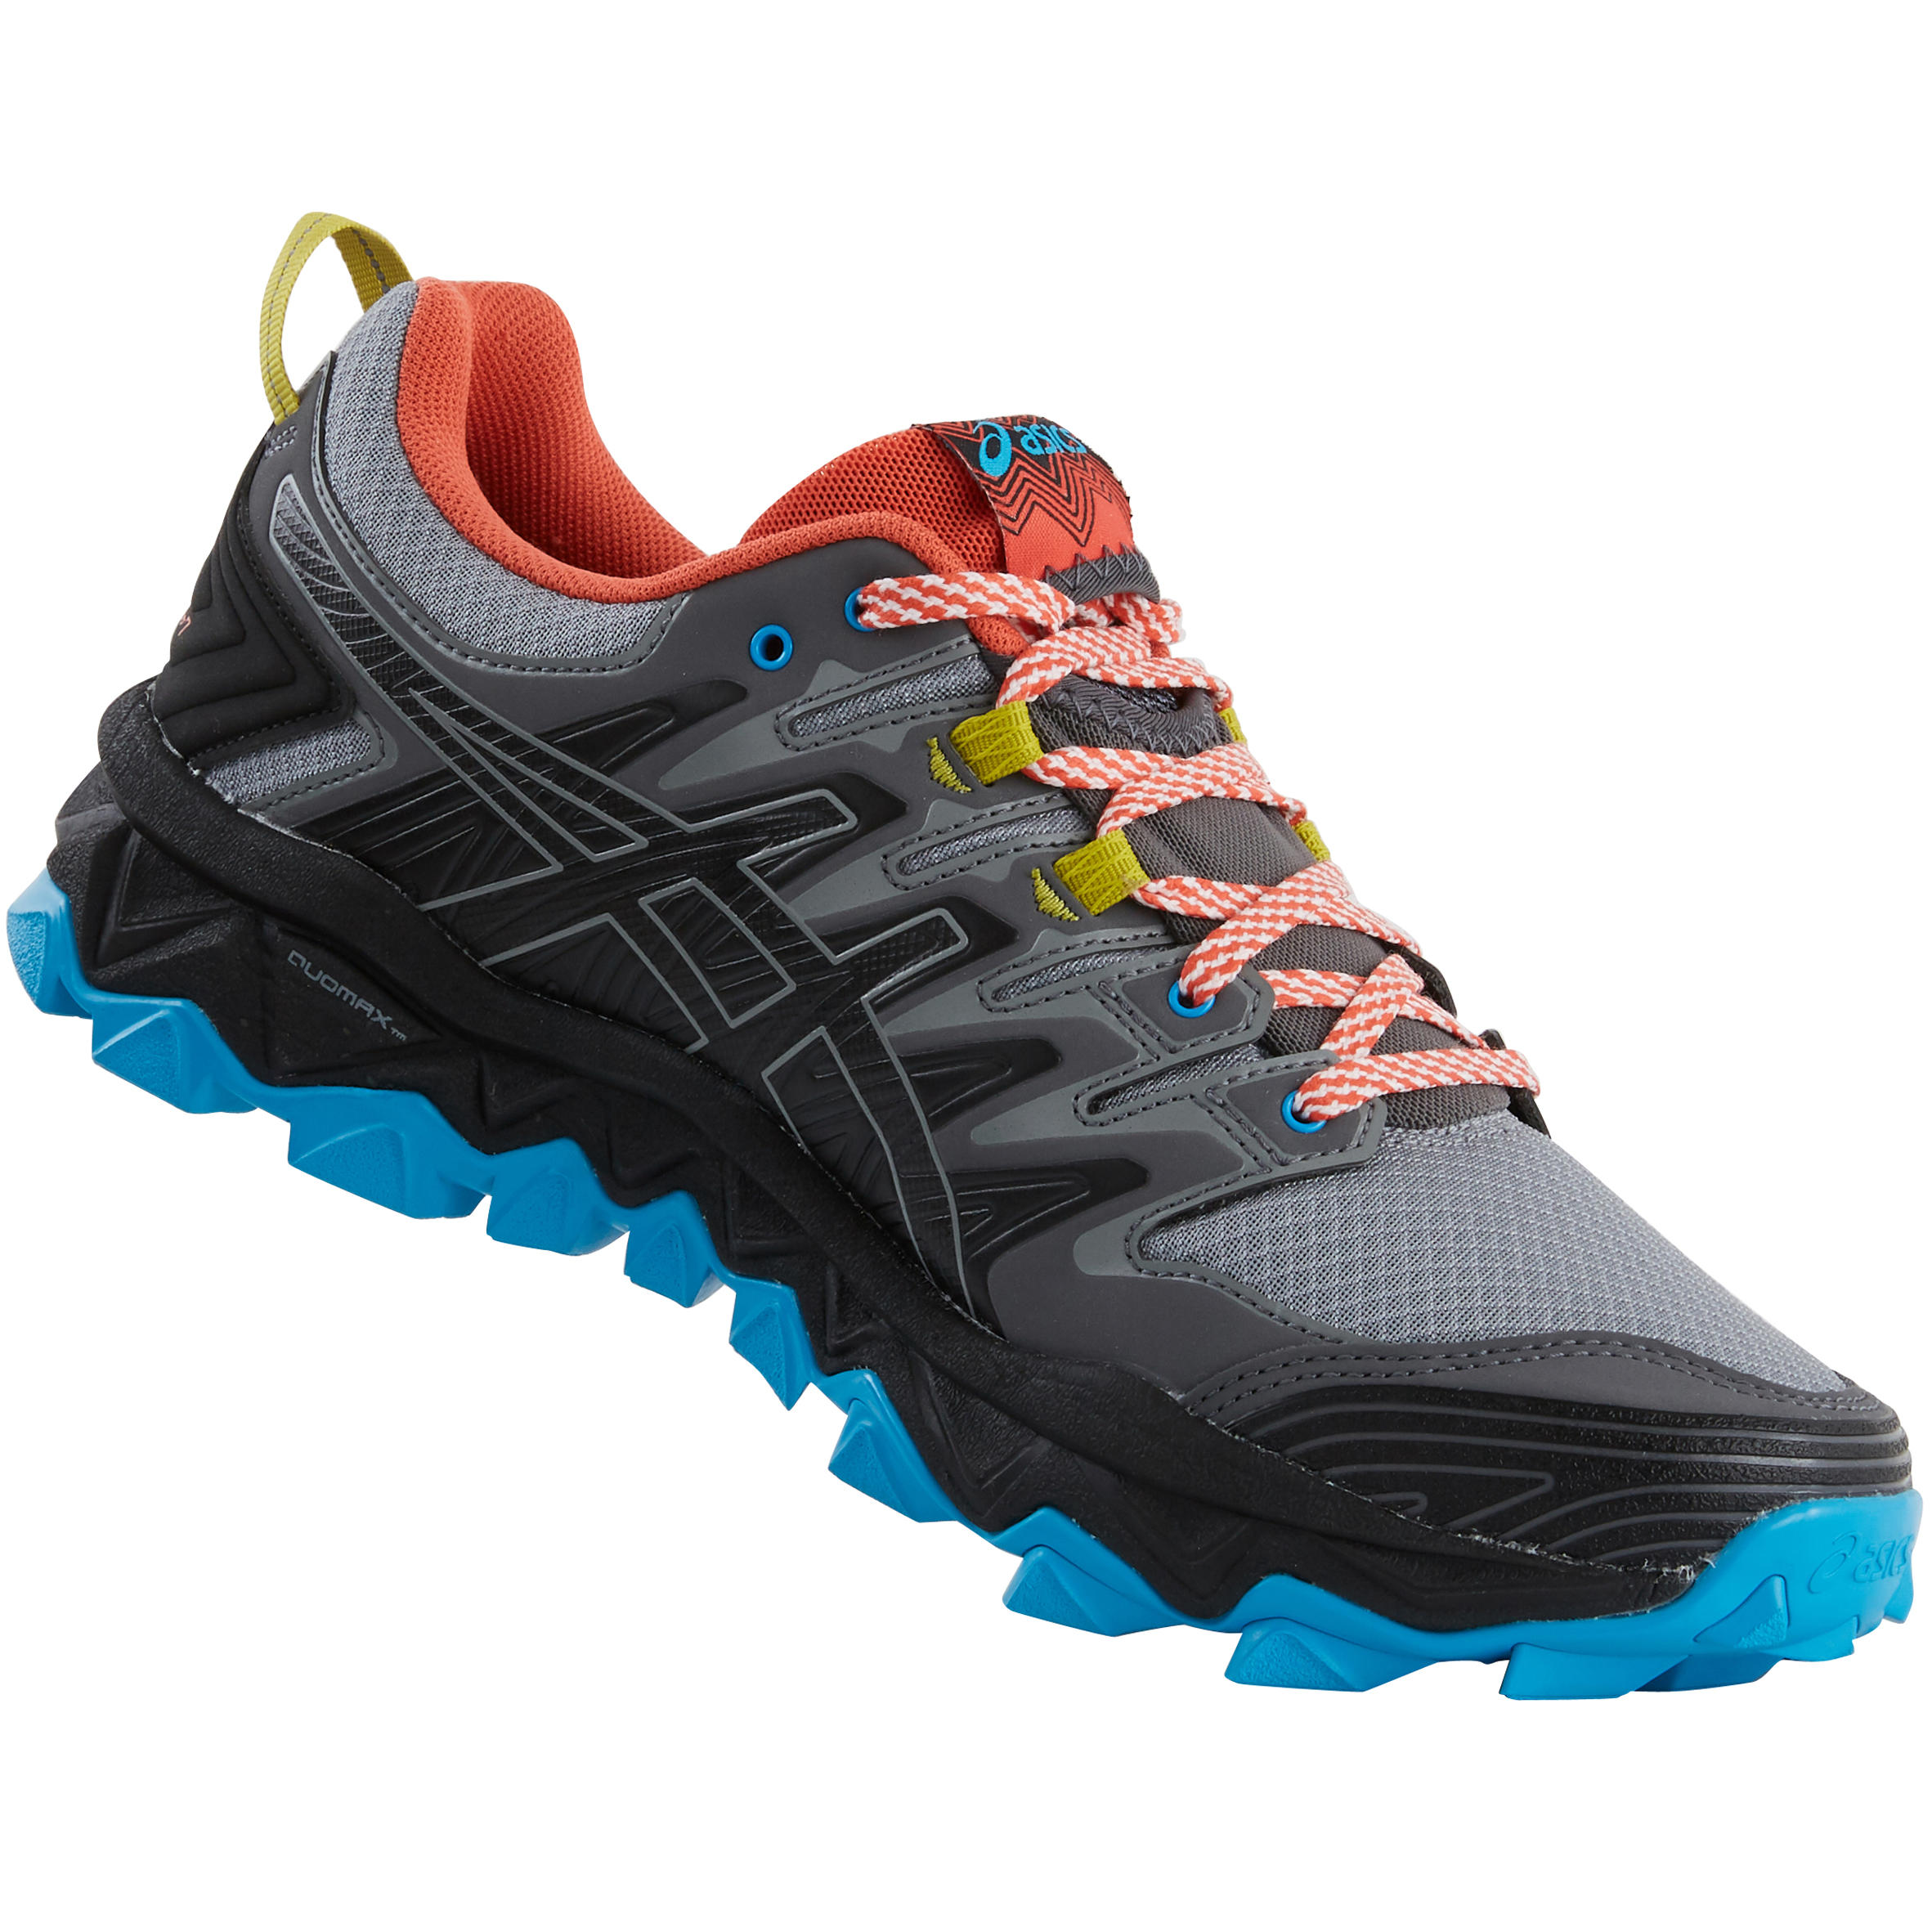 Asics 7 Decathlon Germany, SAVE 59% - aveclumiere.com